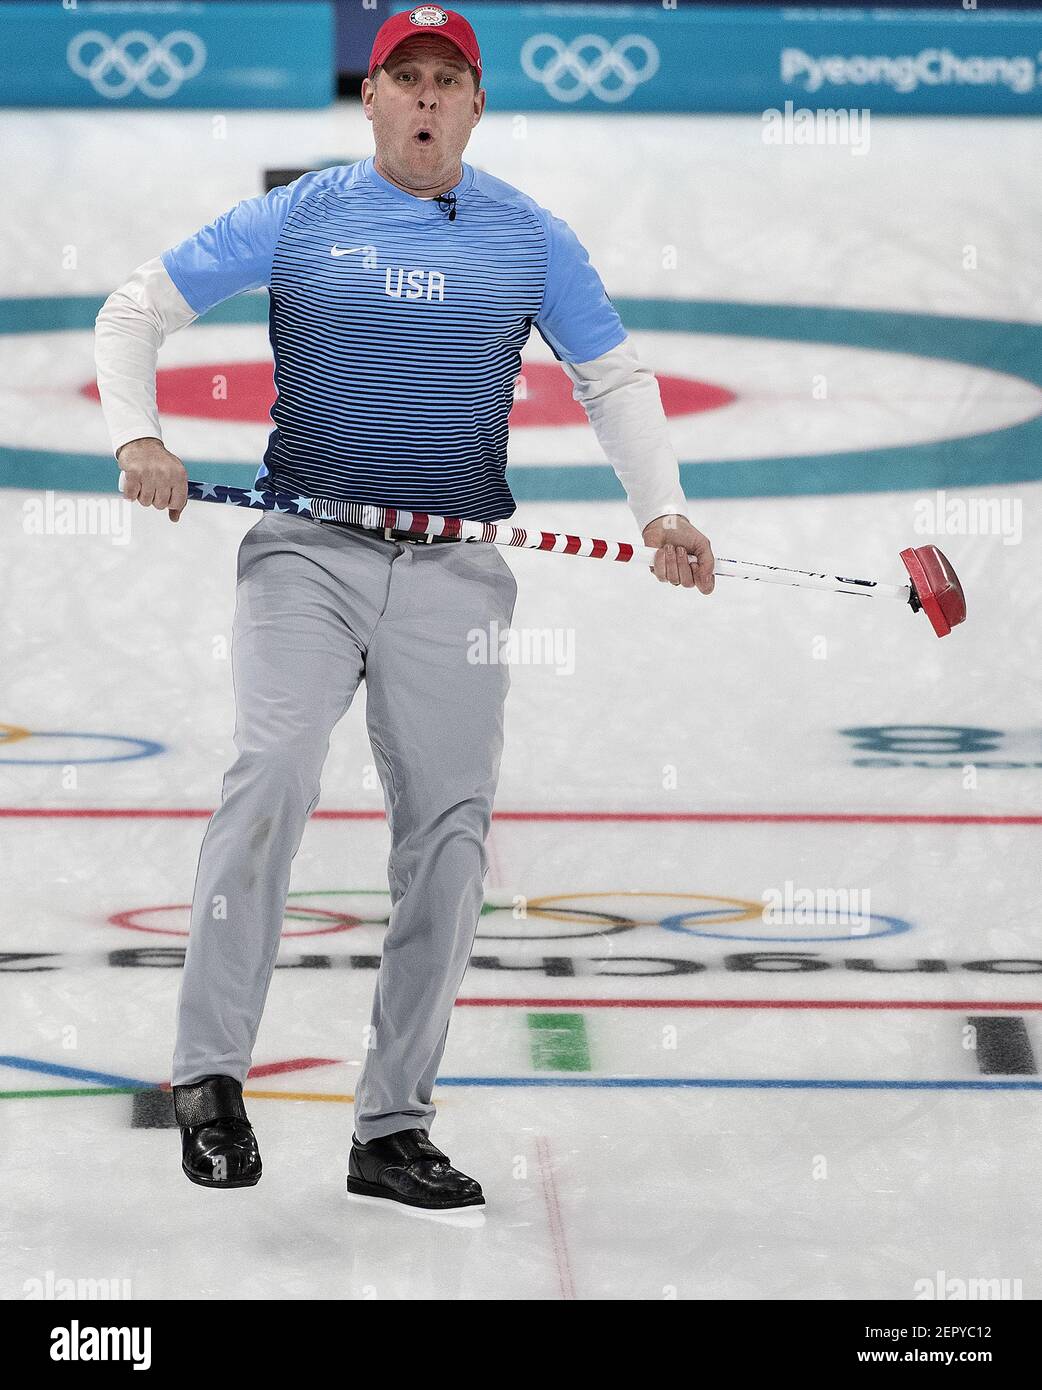 Team skip John Shuster reacts after throwing the last stone and scoring 5 on the eighth end against Sweden during the gold-medal match on Saturday, Feb. 24, 2018, at the Pyeongchang Winter Olympics' Gangneung Curling Centre. The USA won, 10-7. (Photo by Carlos Gonzalez/Minneapolis Star Tribune/TNS/Sipa USA) Stock Photo